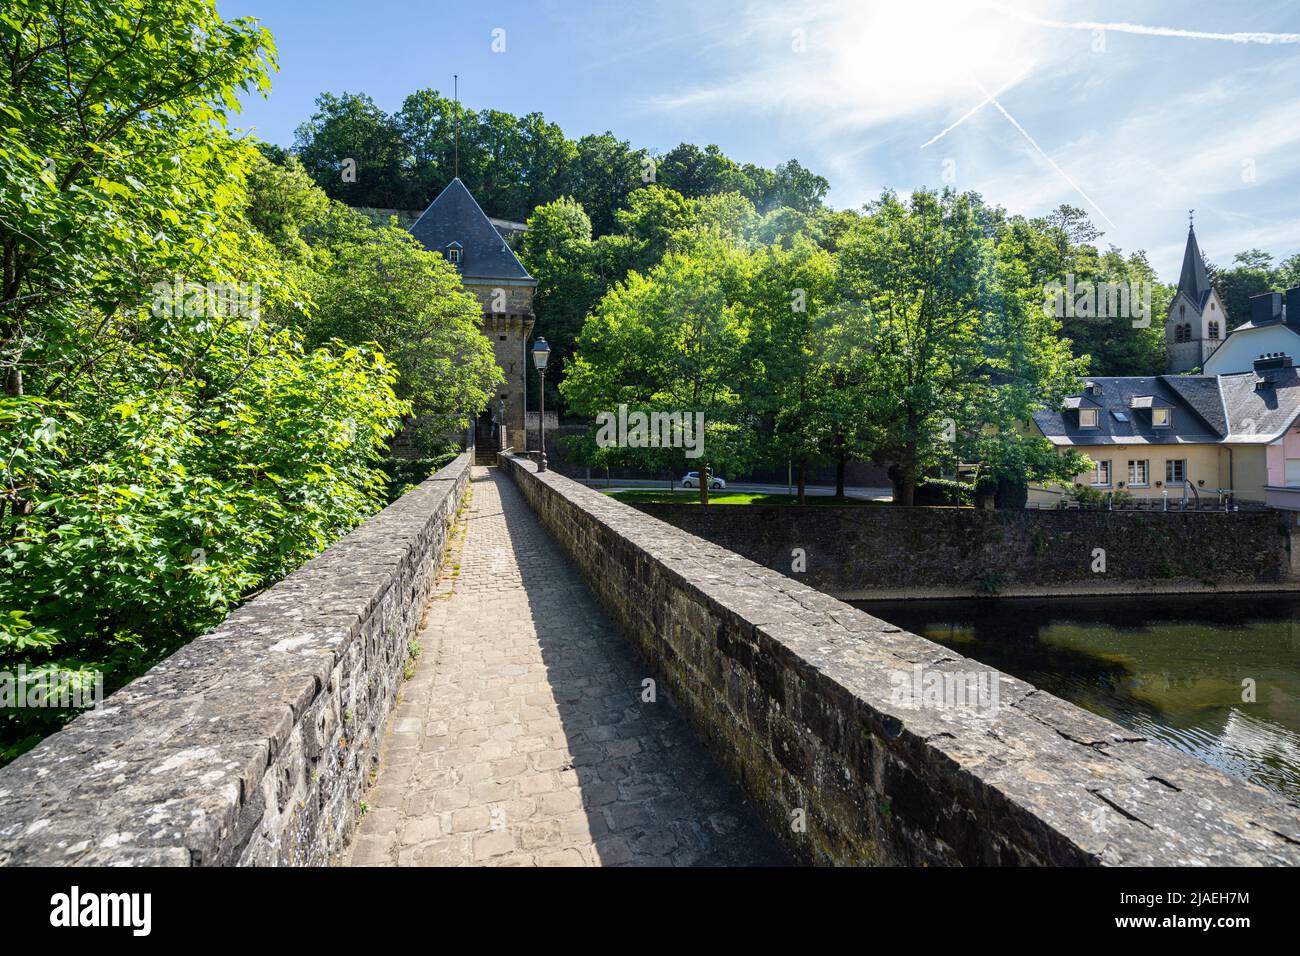 Luxembourg city, May 2022. view of the medieval Vauban tower in the city center Stock Photo